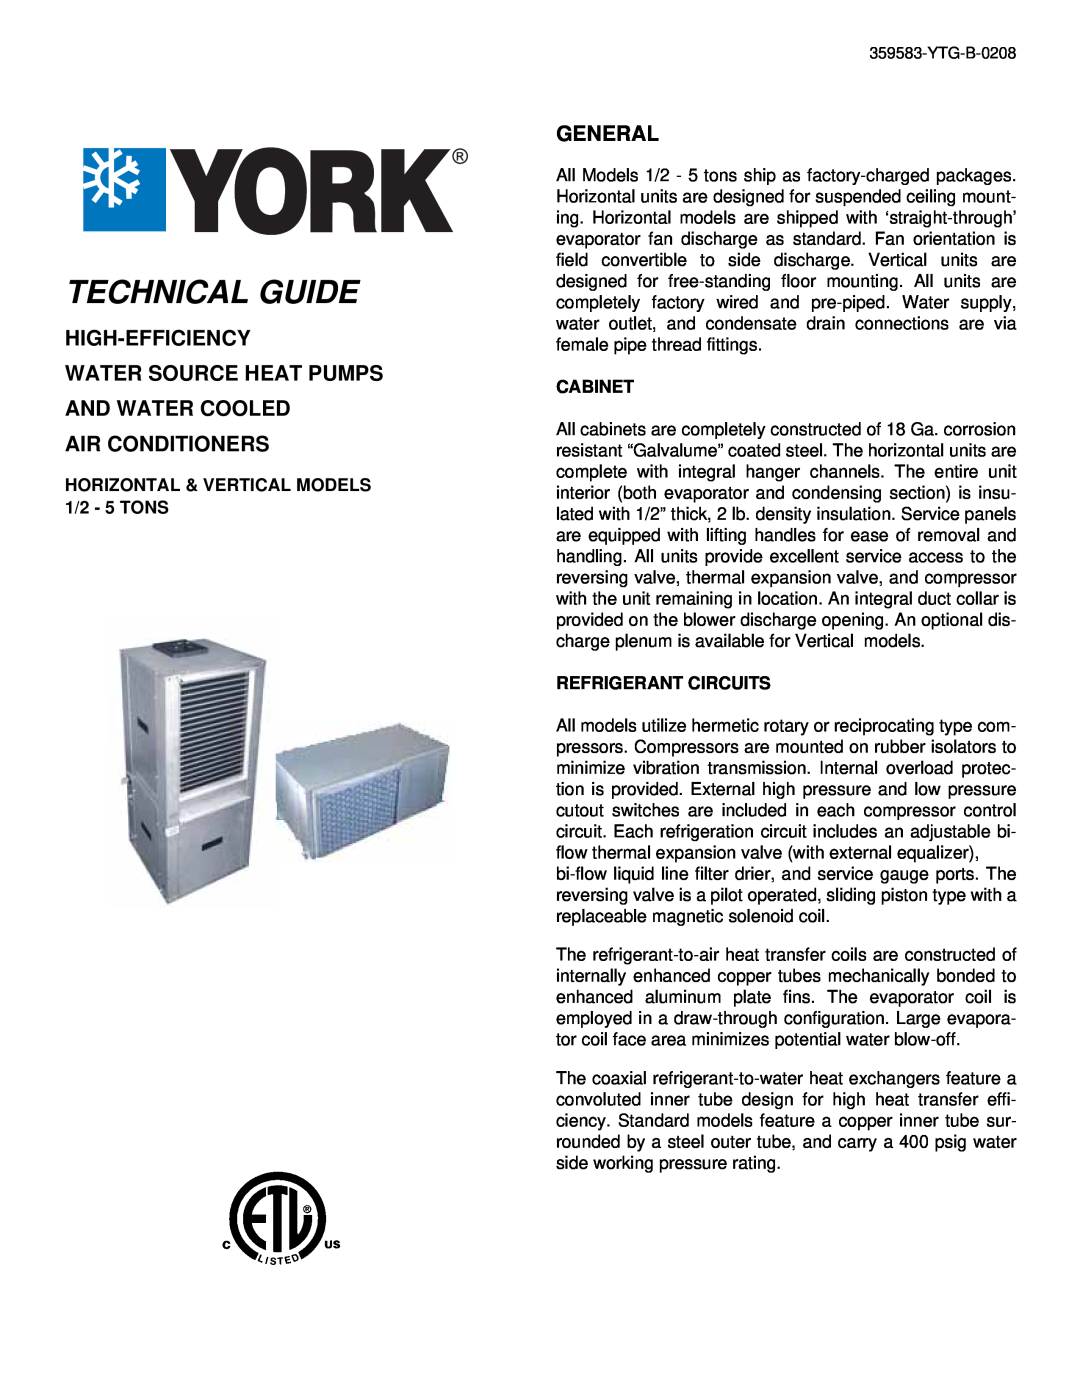 York 359583-YTG-B-0208 manual High-Efficiency, Water Source Heat Pumps And Water Cooled, Air Conditioners, General 